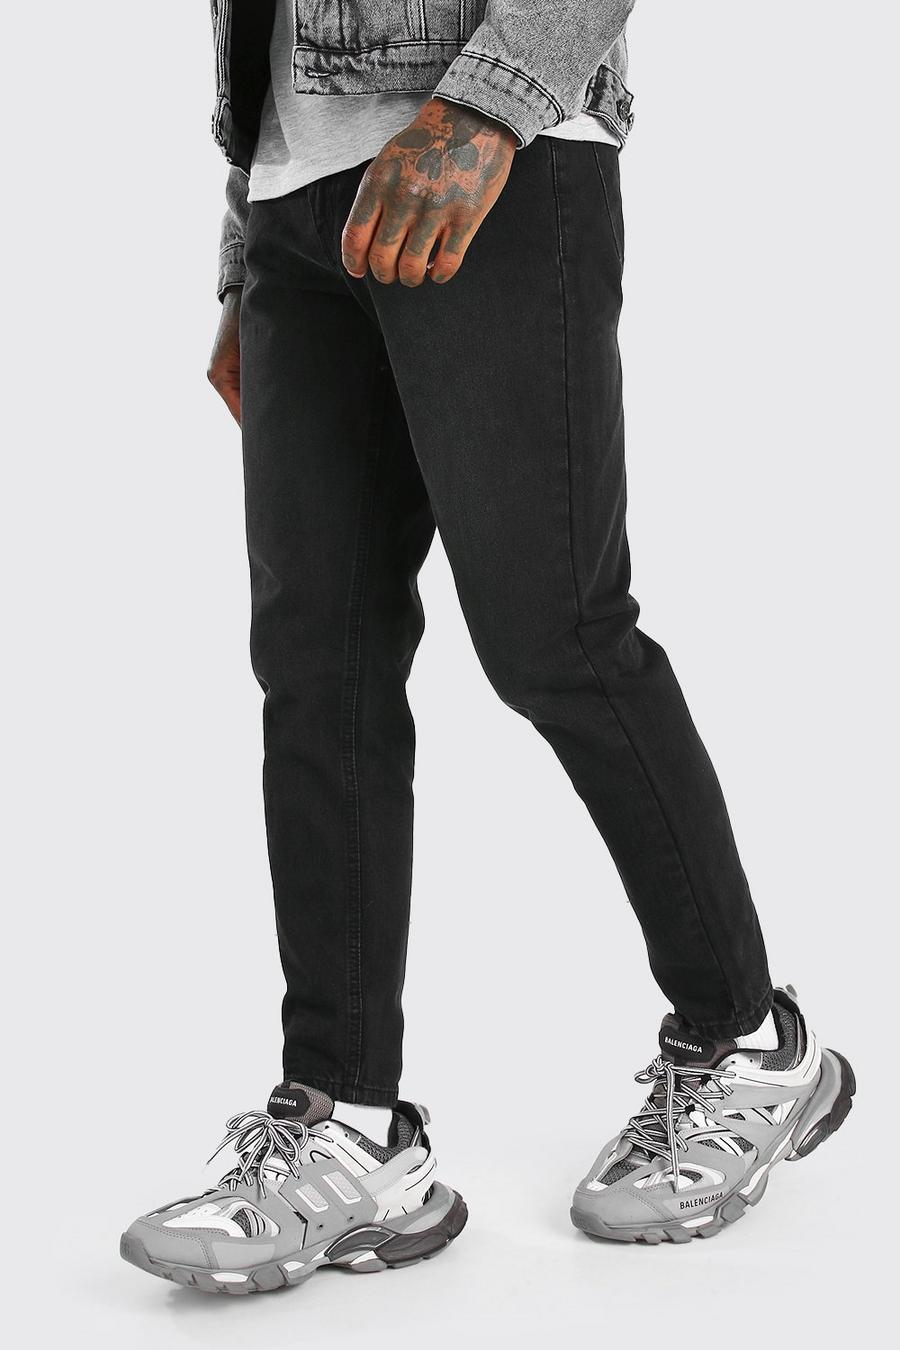 Black Tapered Jeans